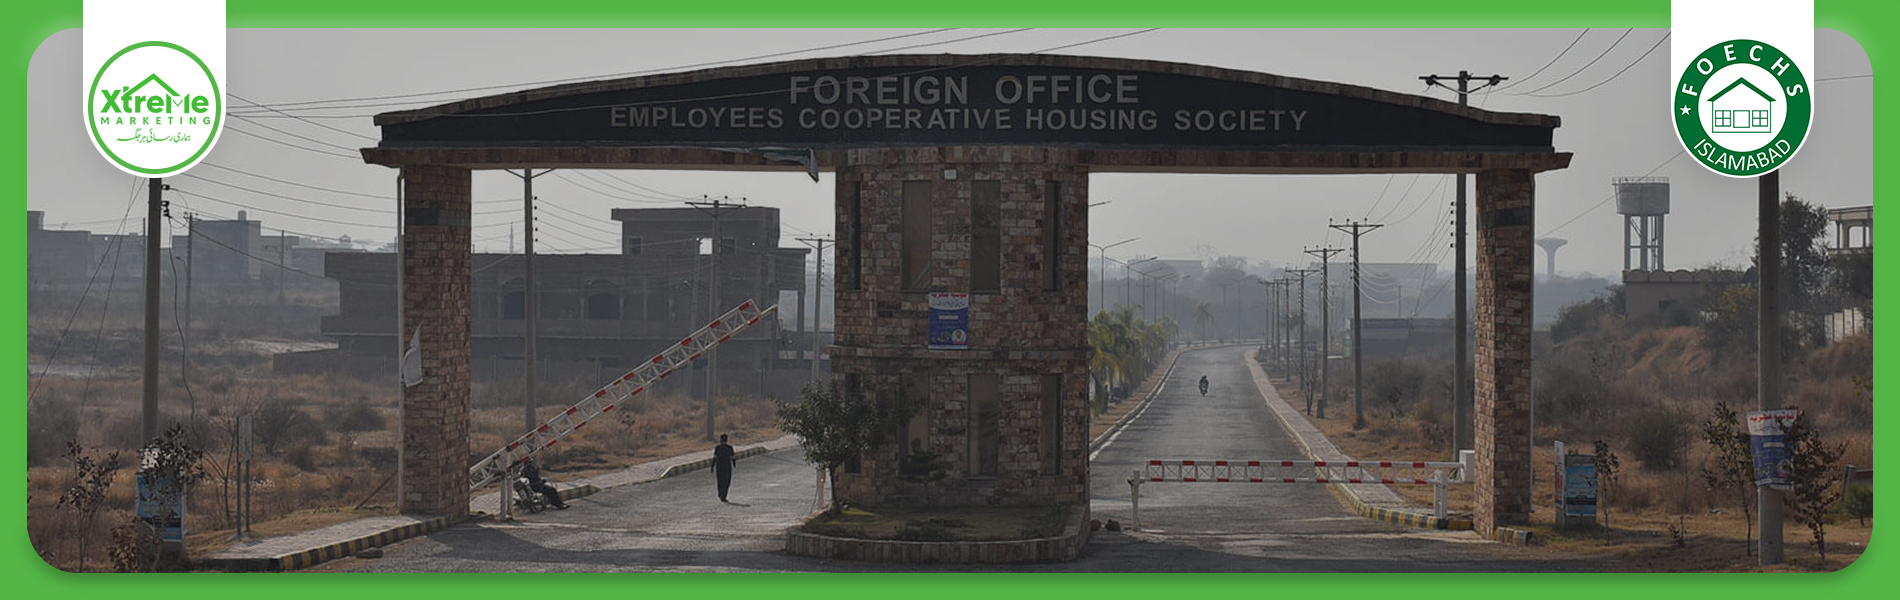 Foreign Office Employees Cooperative Housing Society (2).jpg